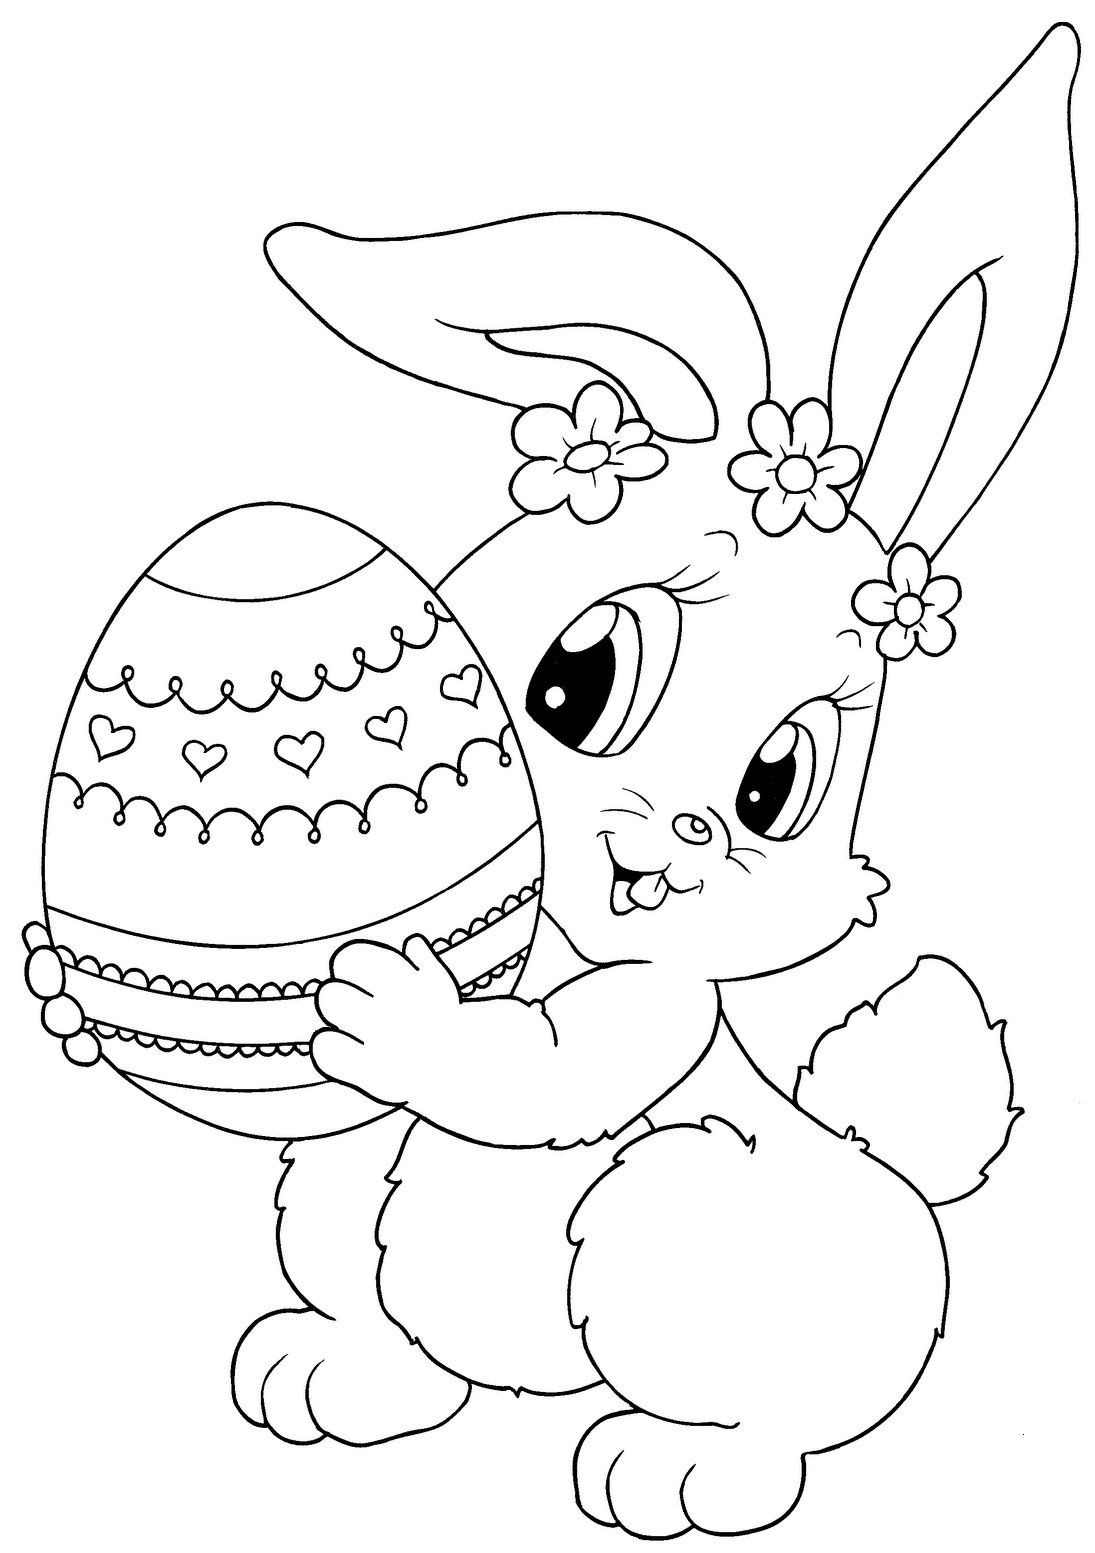 Top 15 Free Printable Easter Bunny Coloring Pages Online | Coloring - Coloring Pages Free Printable Easter